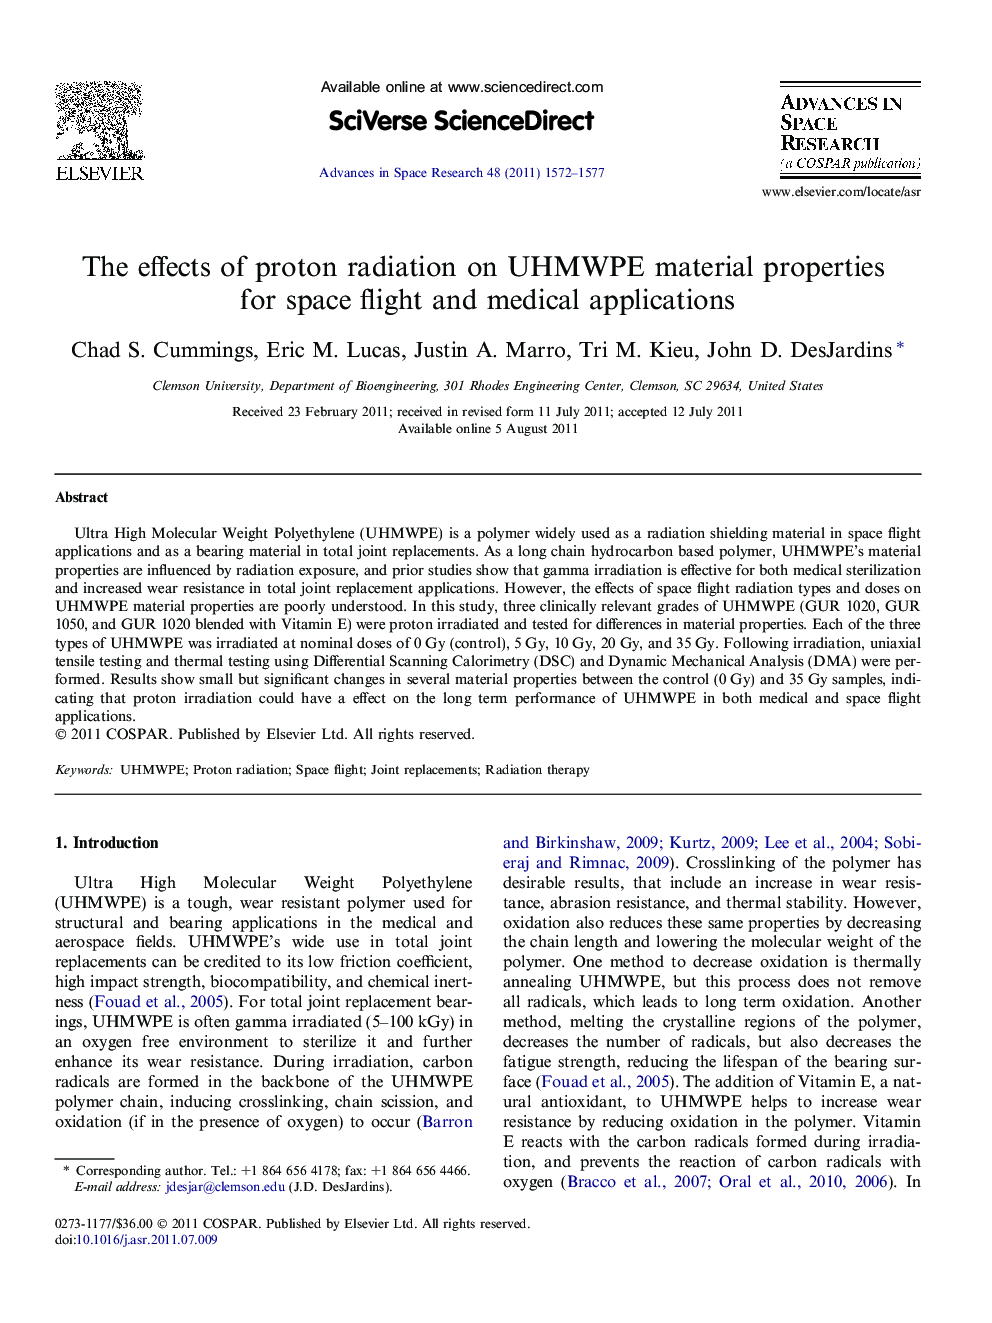 The effects of proton radiation on UHMWPE material properties for space flight and medical applications